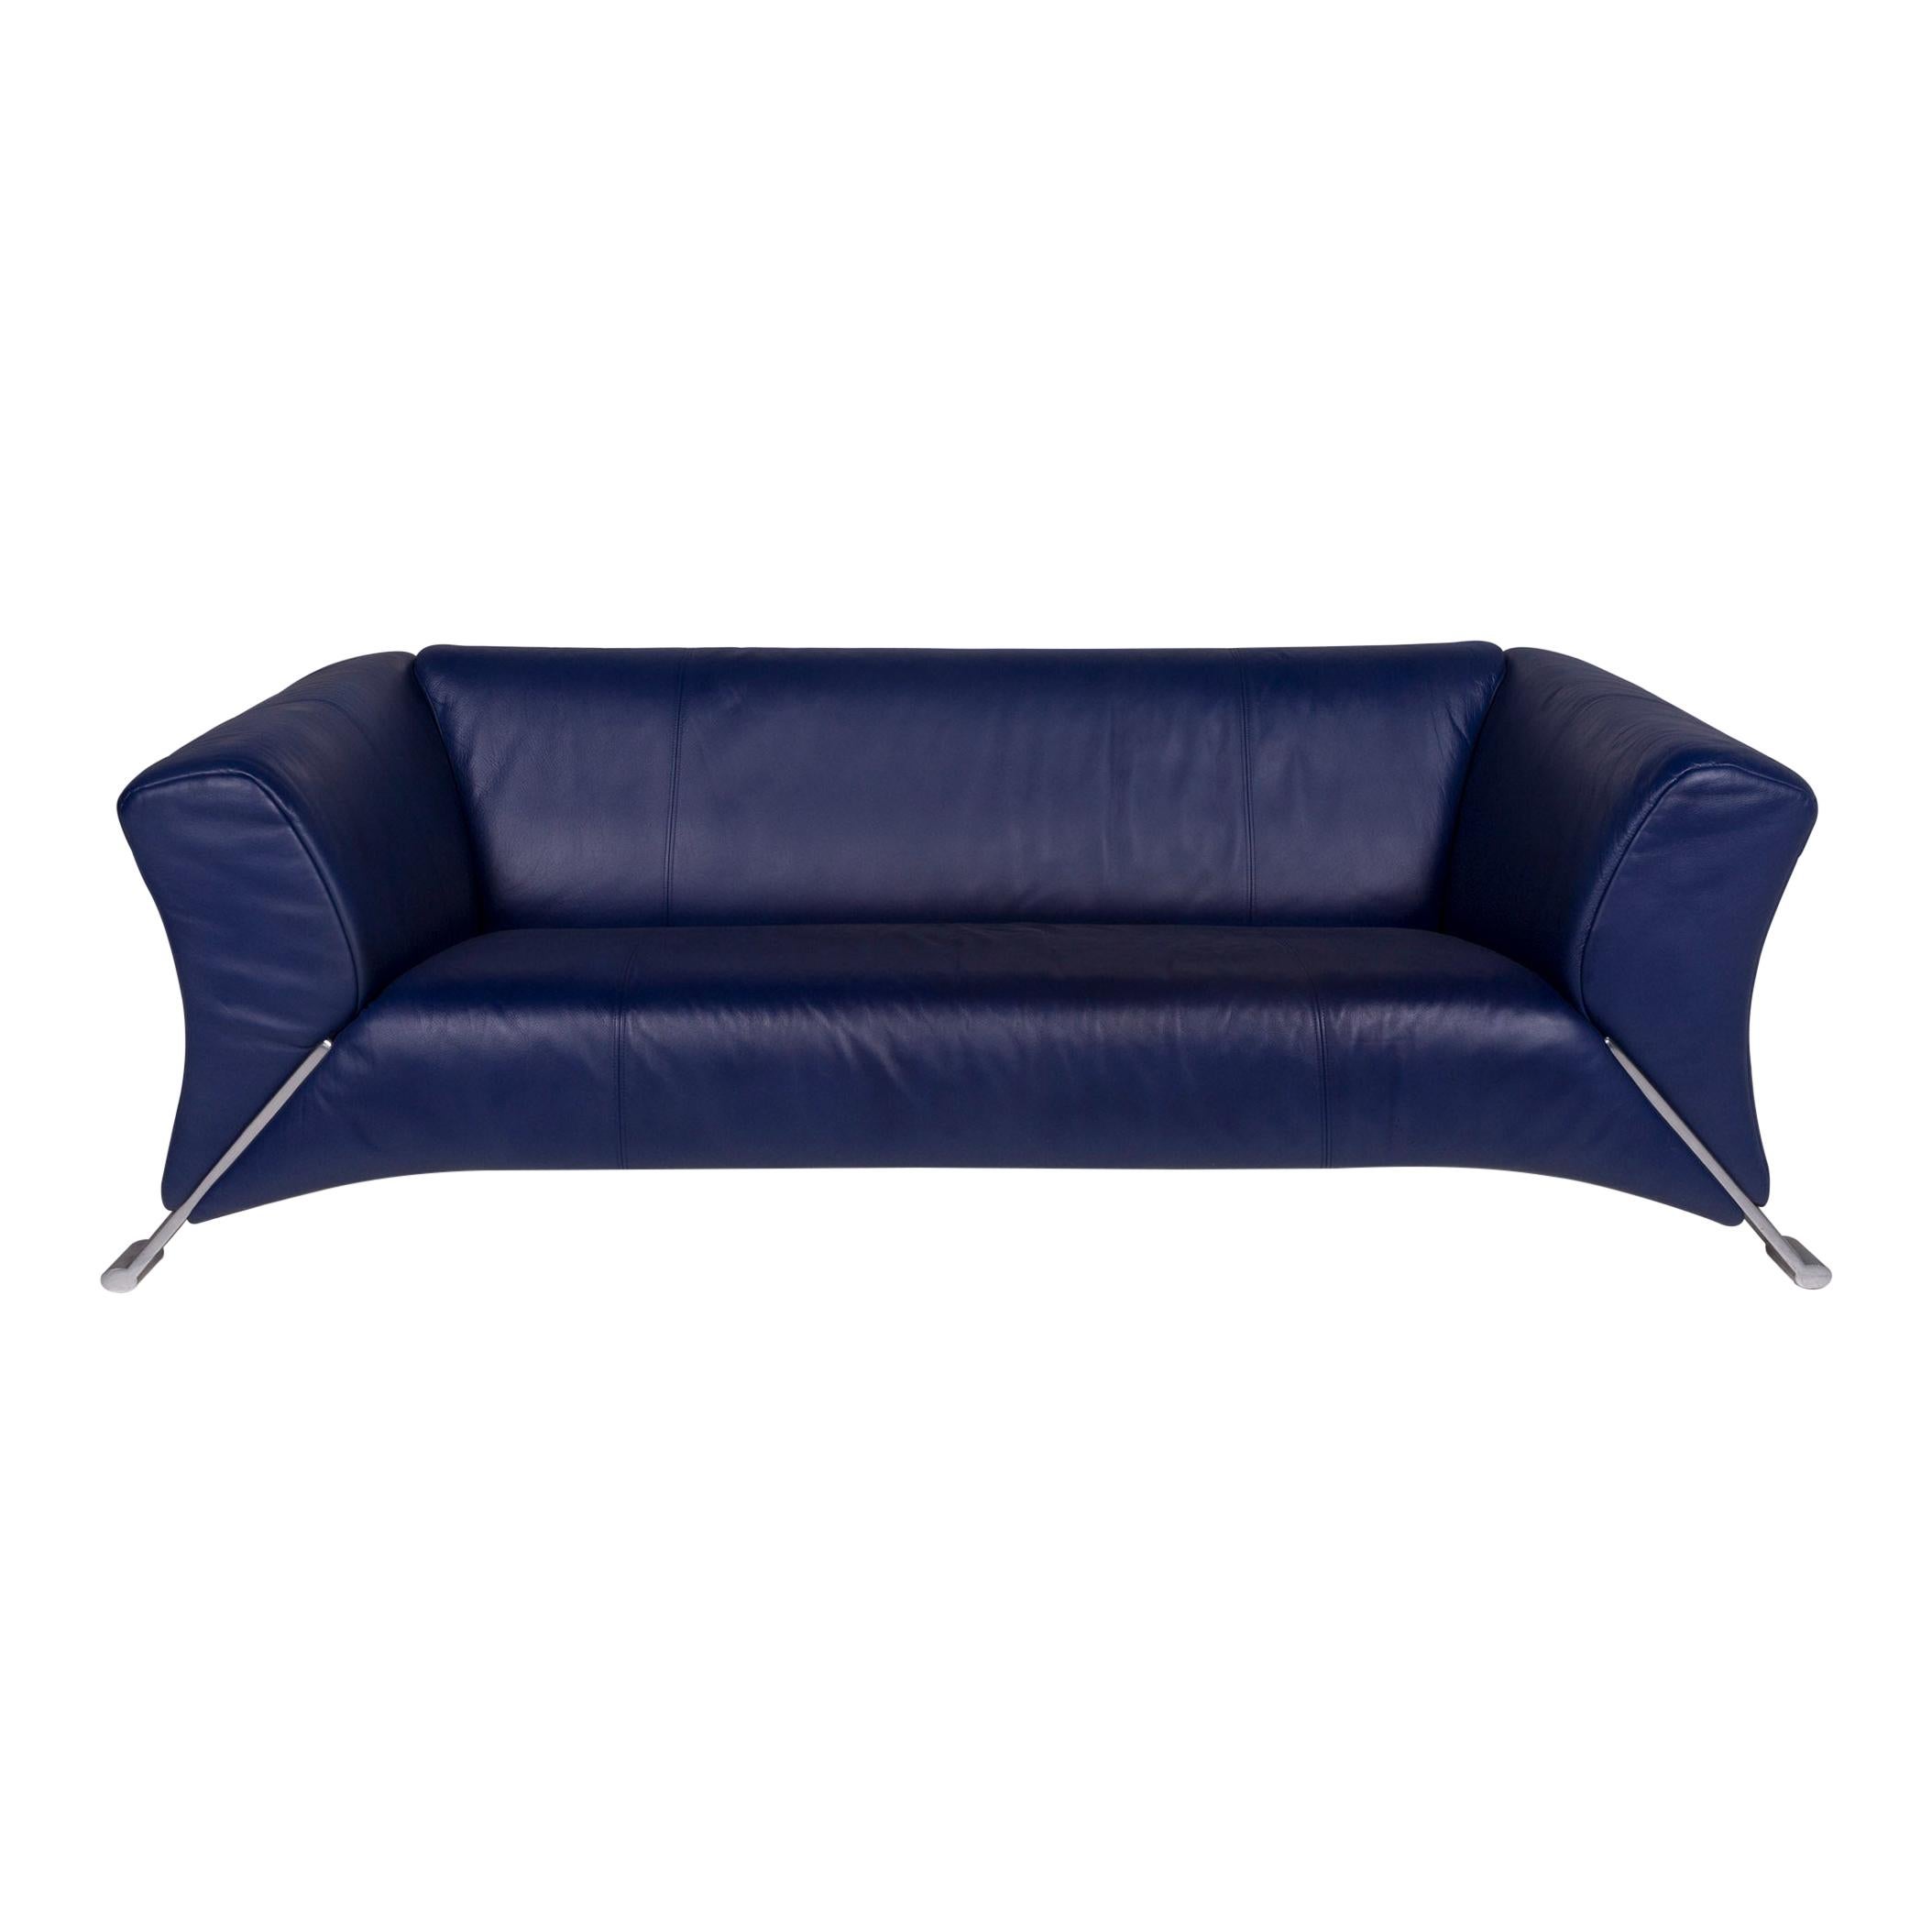 Rolf Benz 322 Leather Sofa Blue Three-Seat Couch For Sale